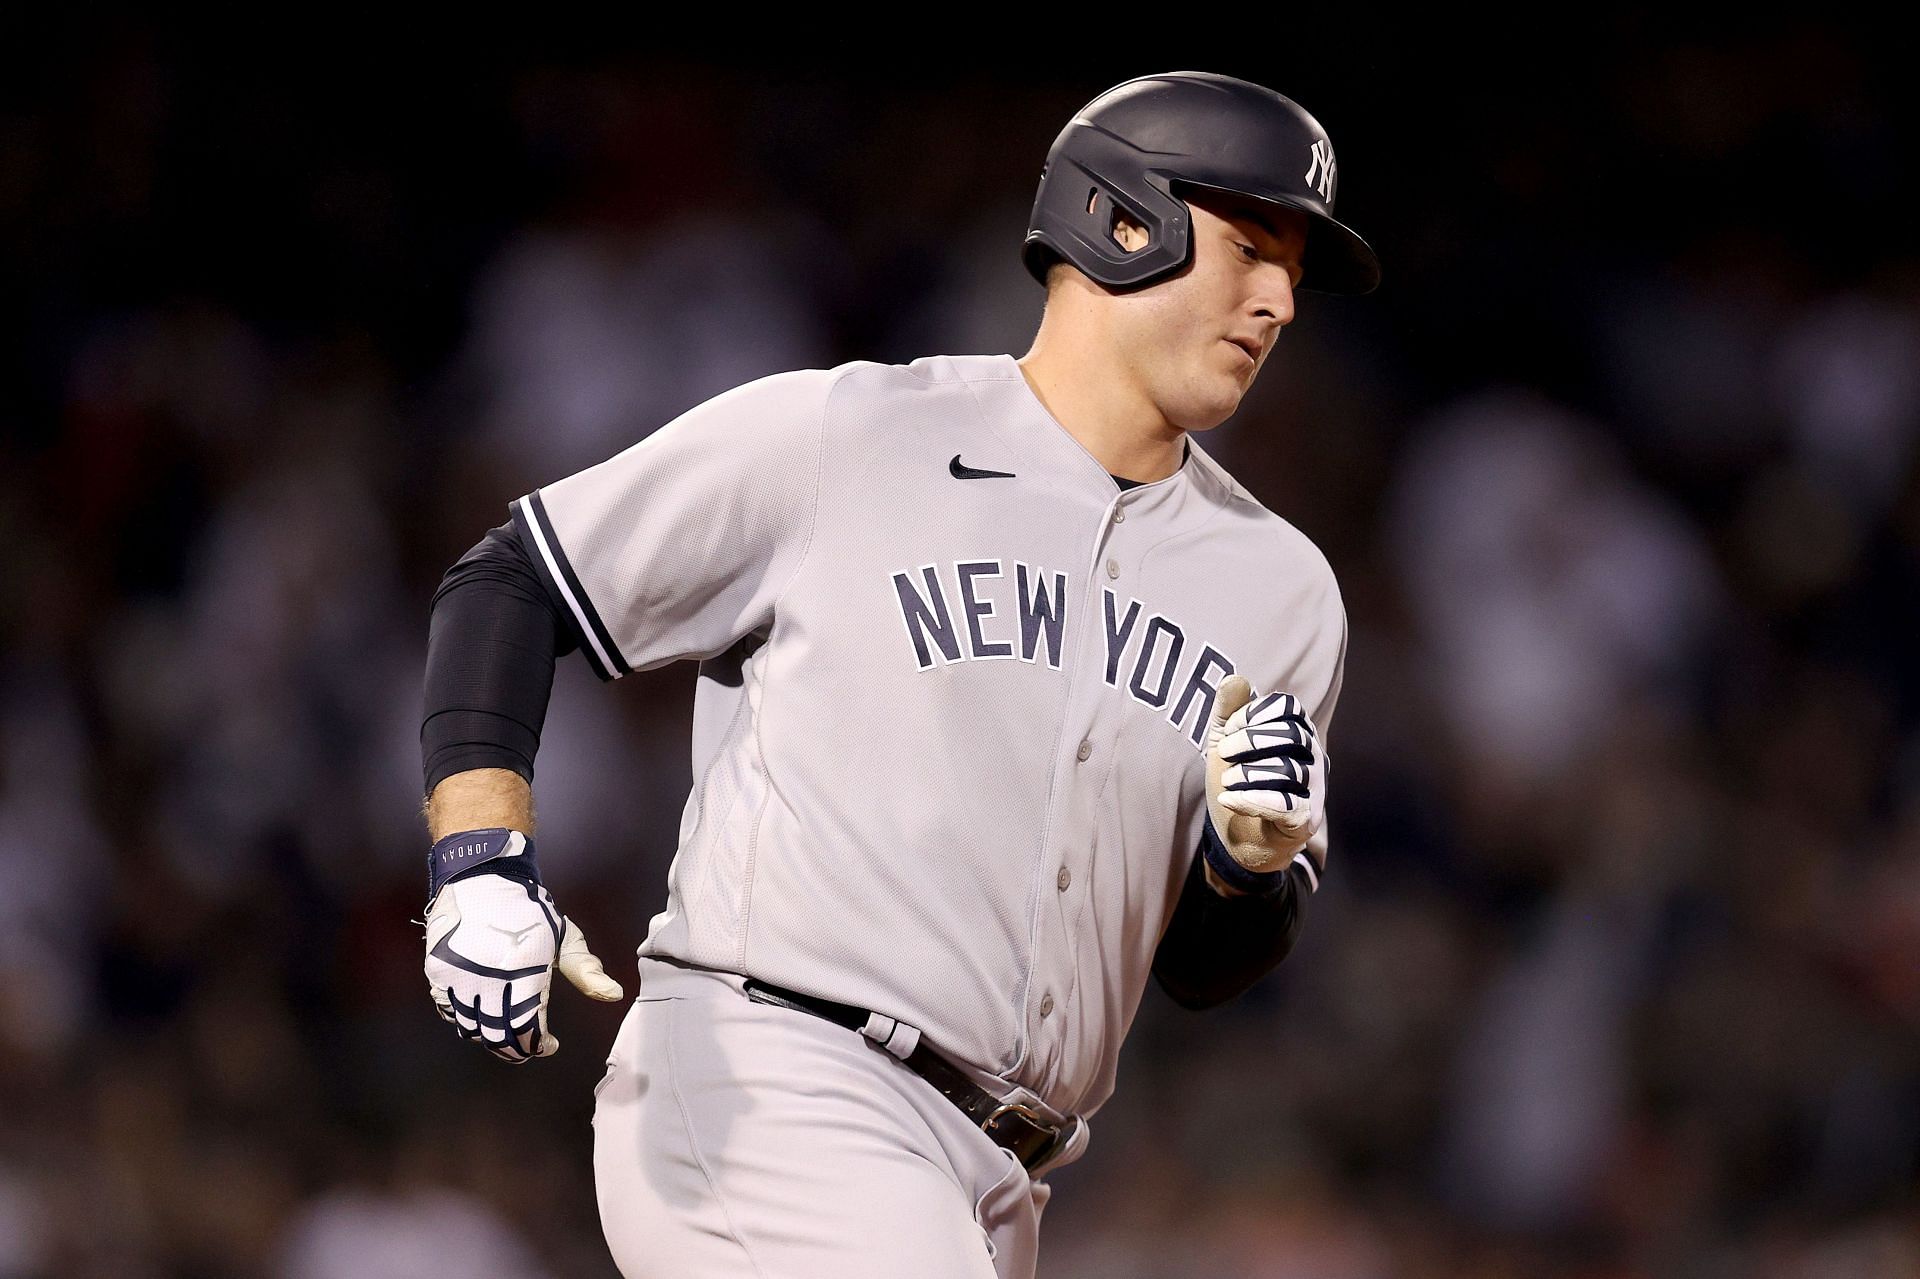 Anthony Rizzo is looking forward to his first full season with the Yankees